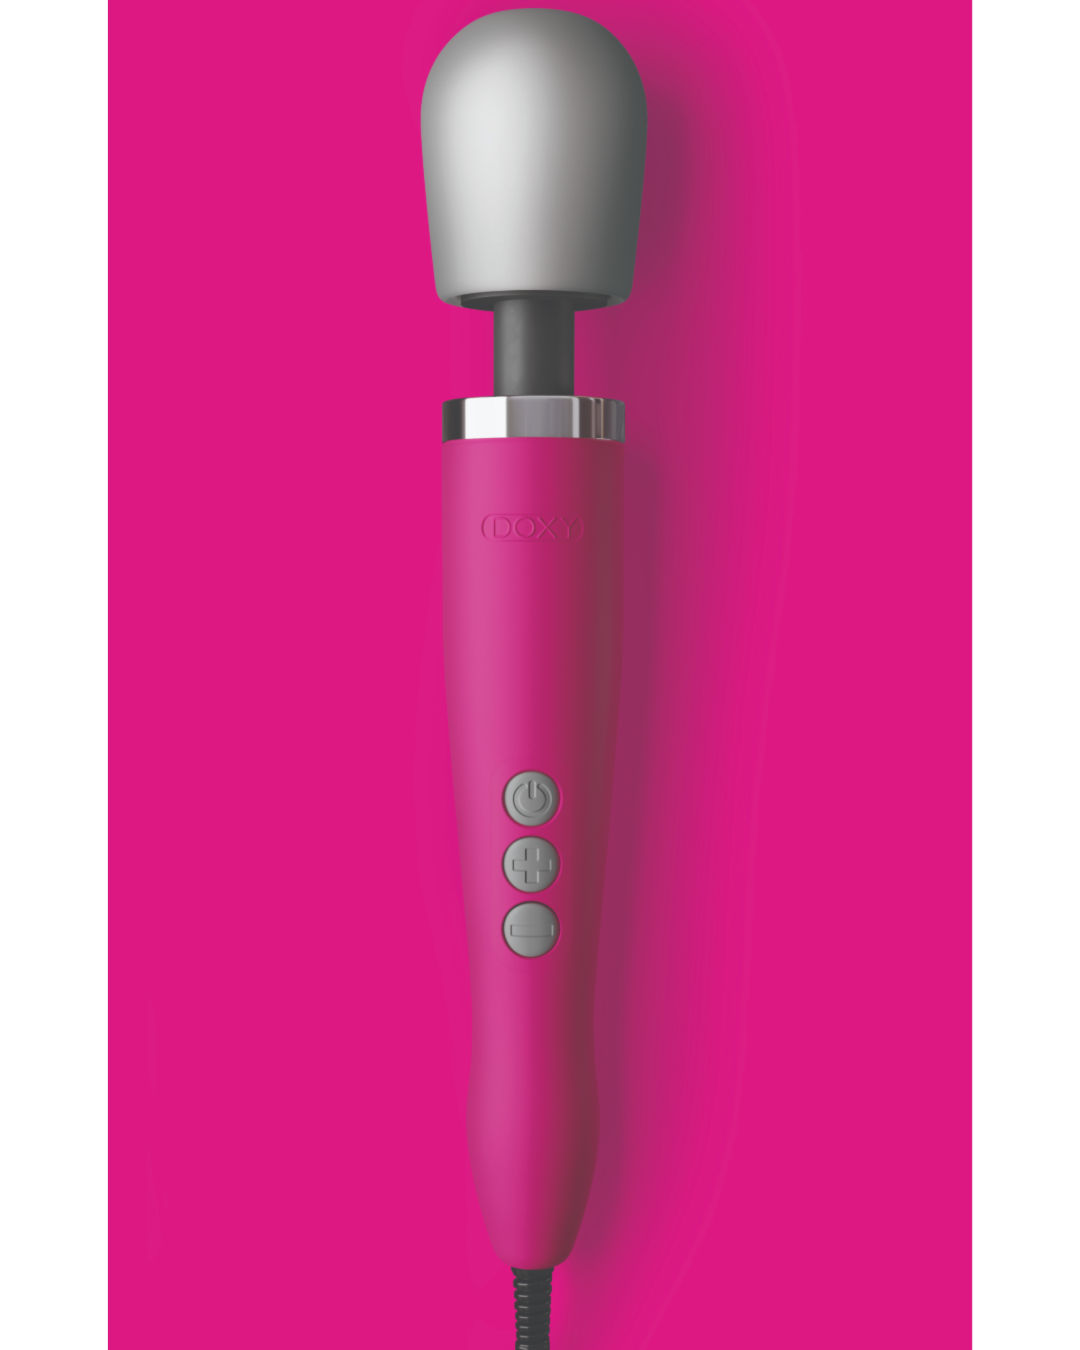 Doxy Extra Powerful Wand Vibrator - Pink on a lighter pink background showing the wand and buttons